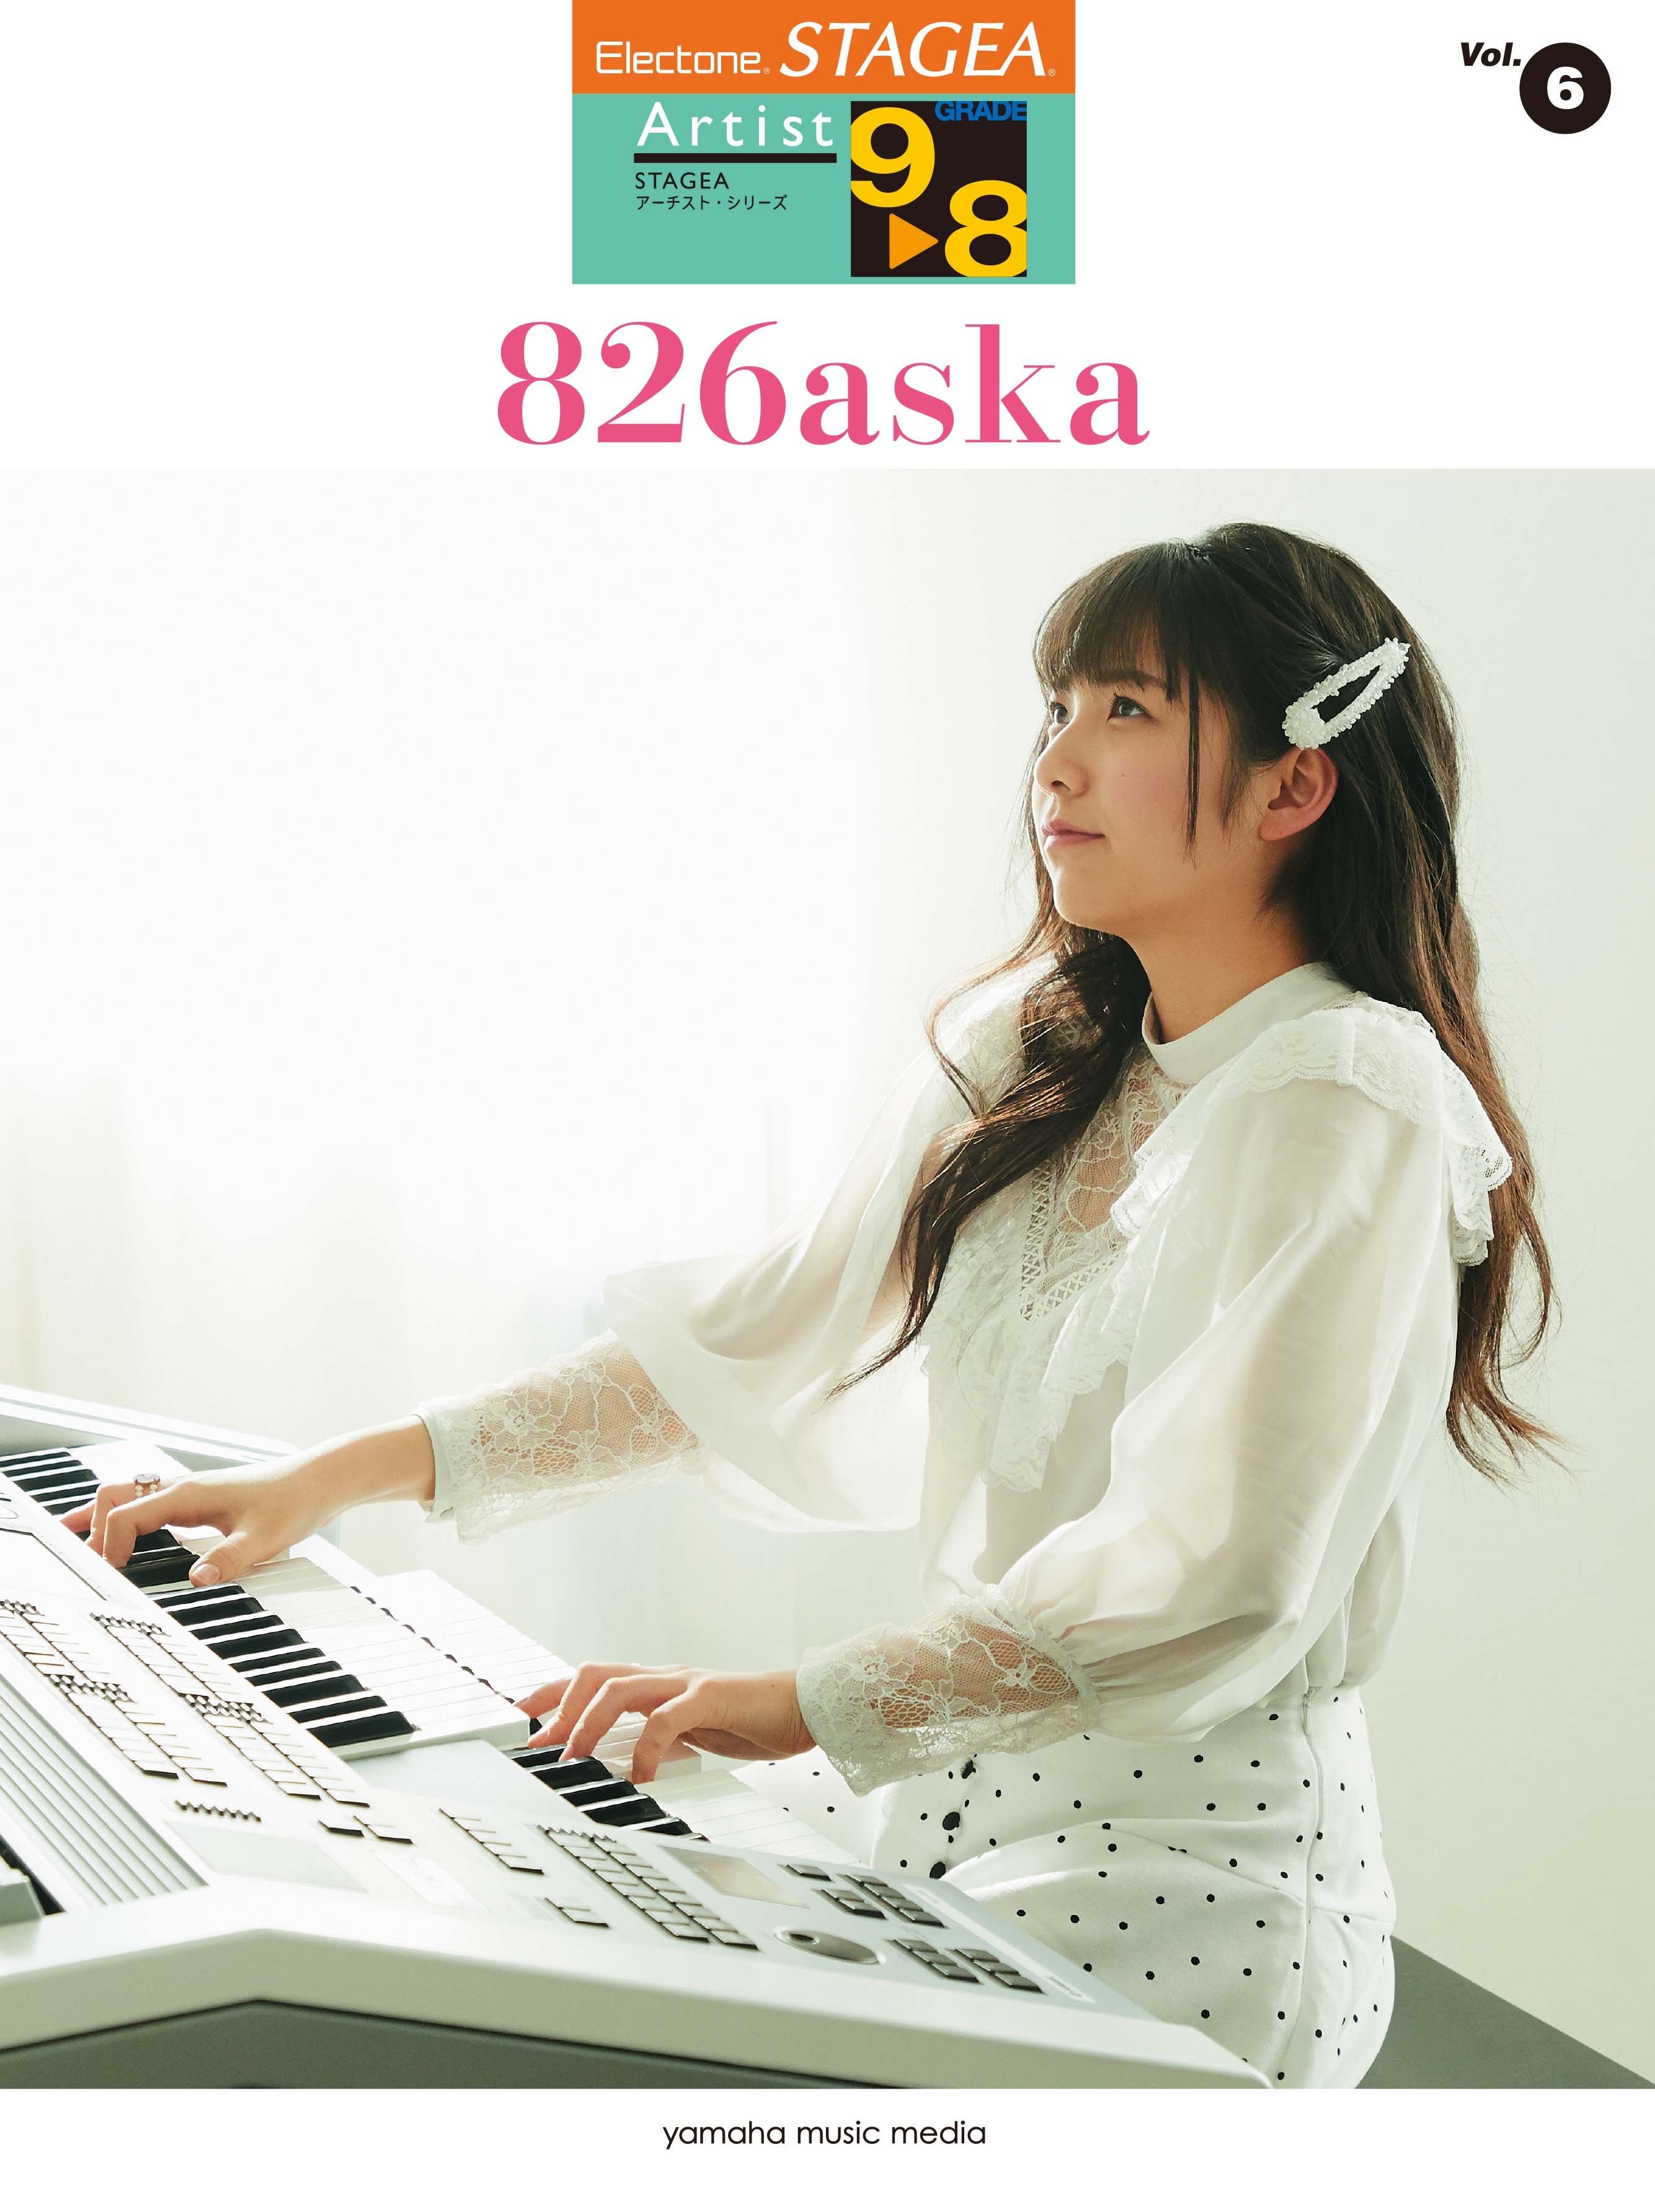 STAGEA アーチスト 9～8級 Vol.6 826aska | ヤマハの楽譜通販サイト 